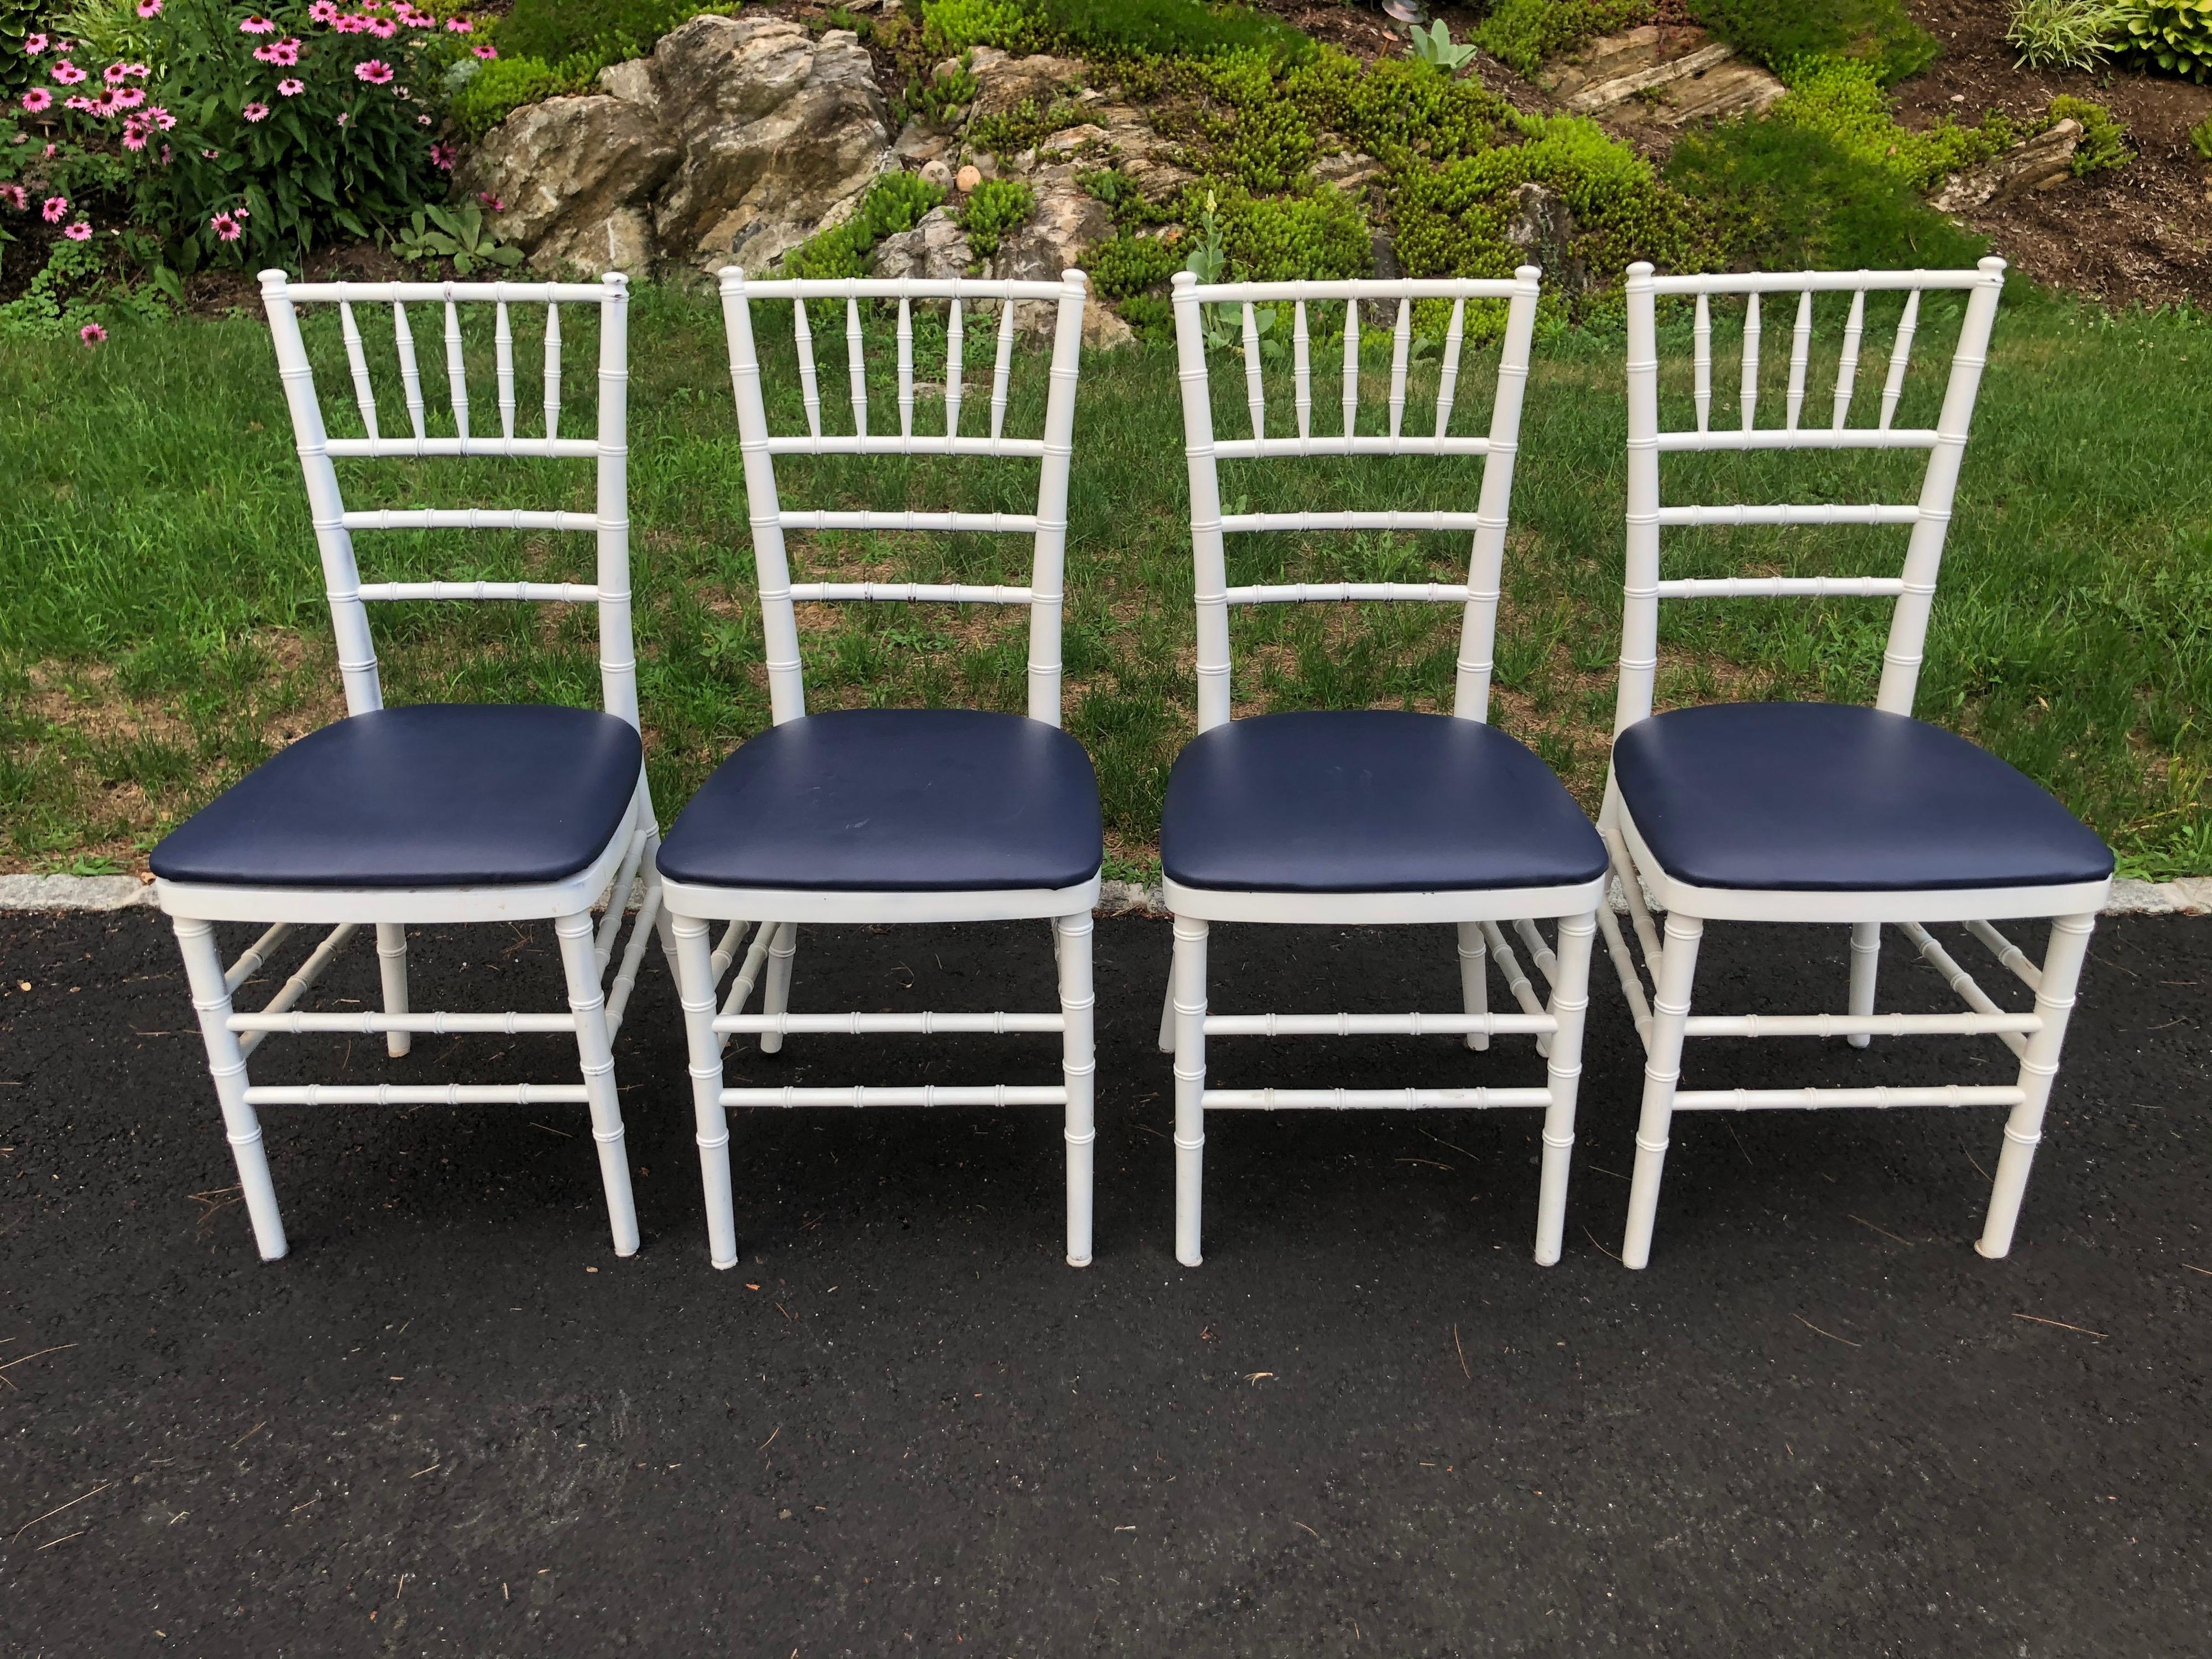 Chinese Chippendale Set of Four Classic White Wooden Chiavari Chairs with Navy Seats For Sale